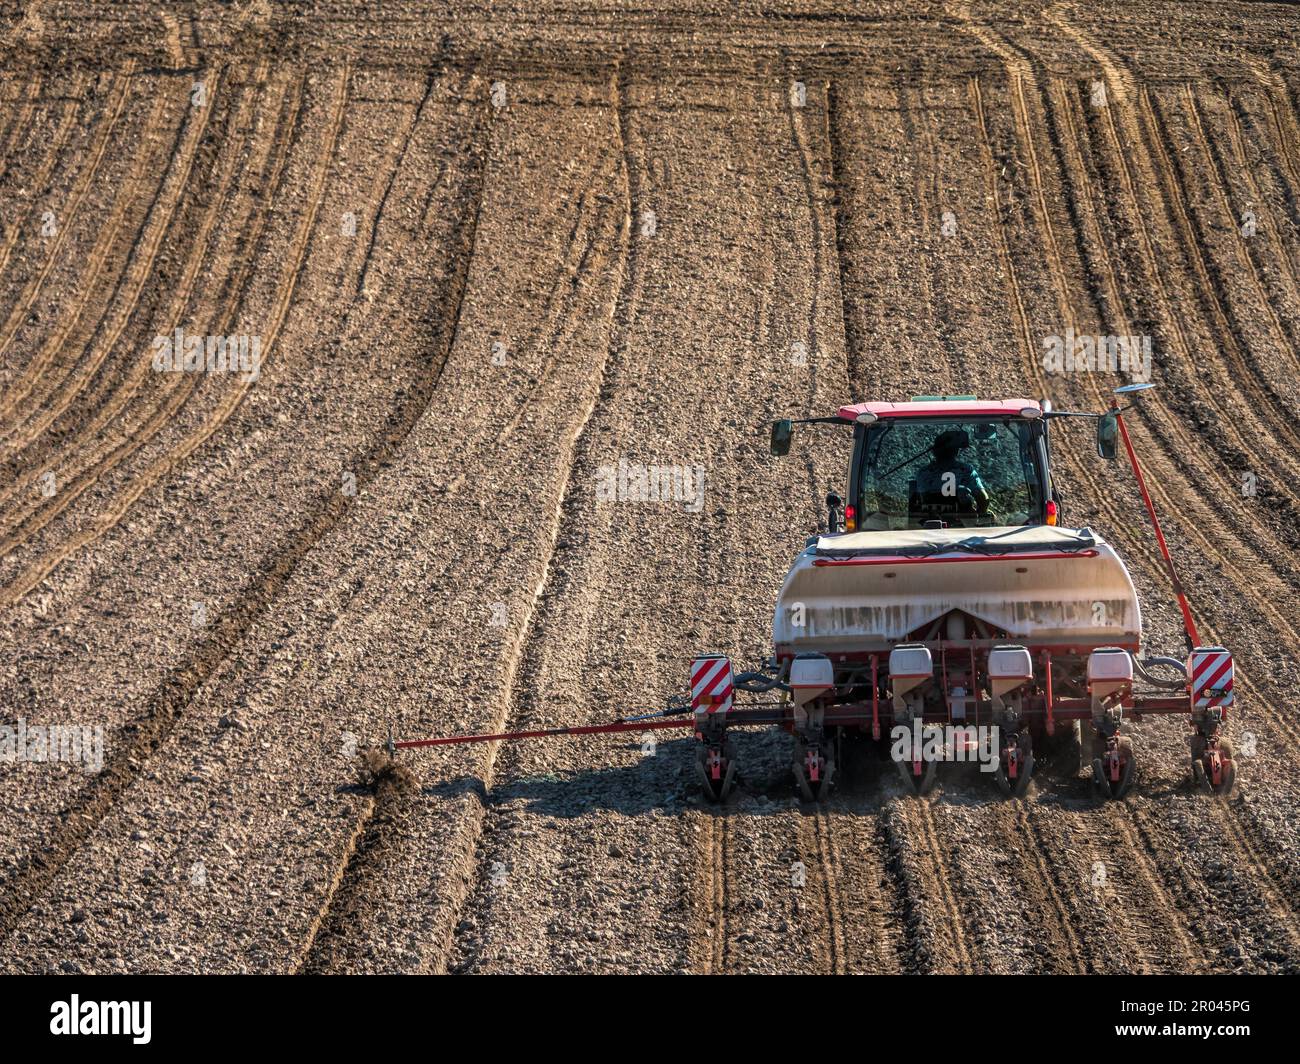 Arable field being planted by sowing machine Stock Photo